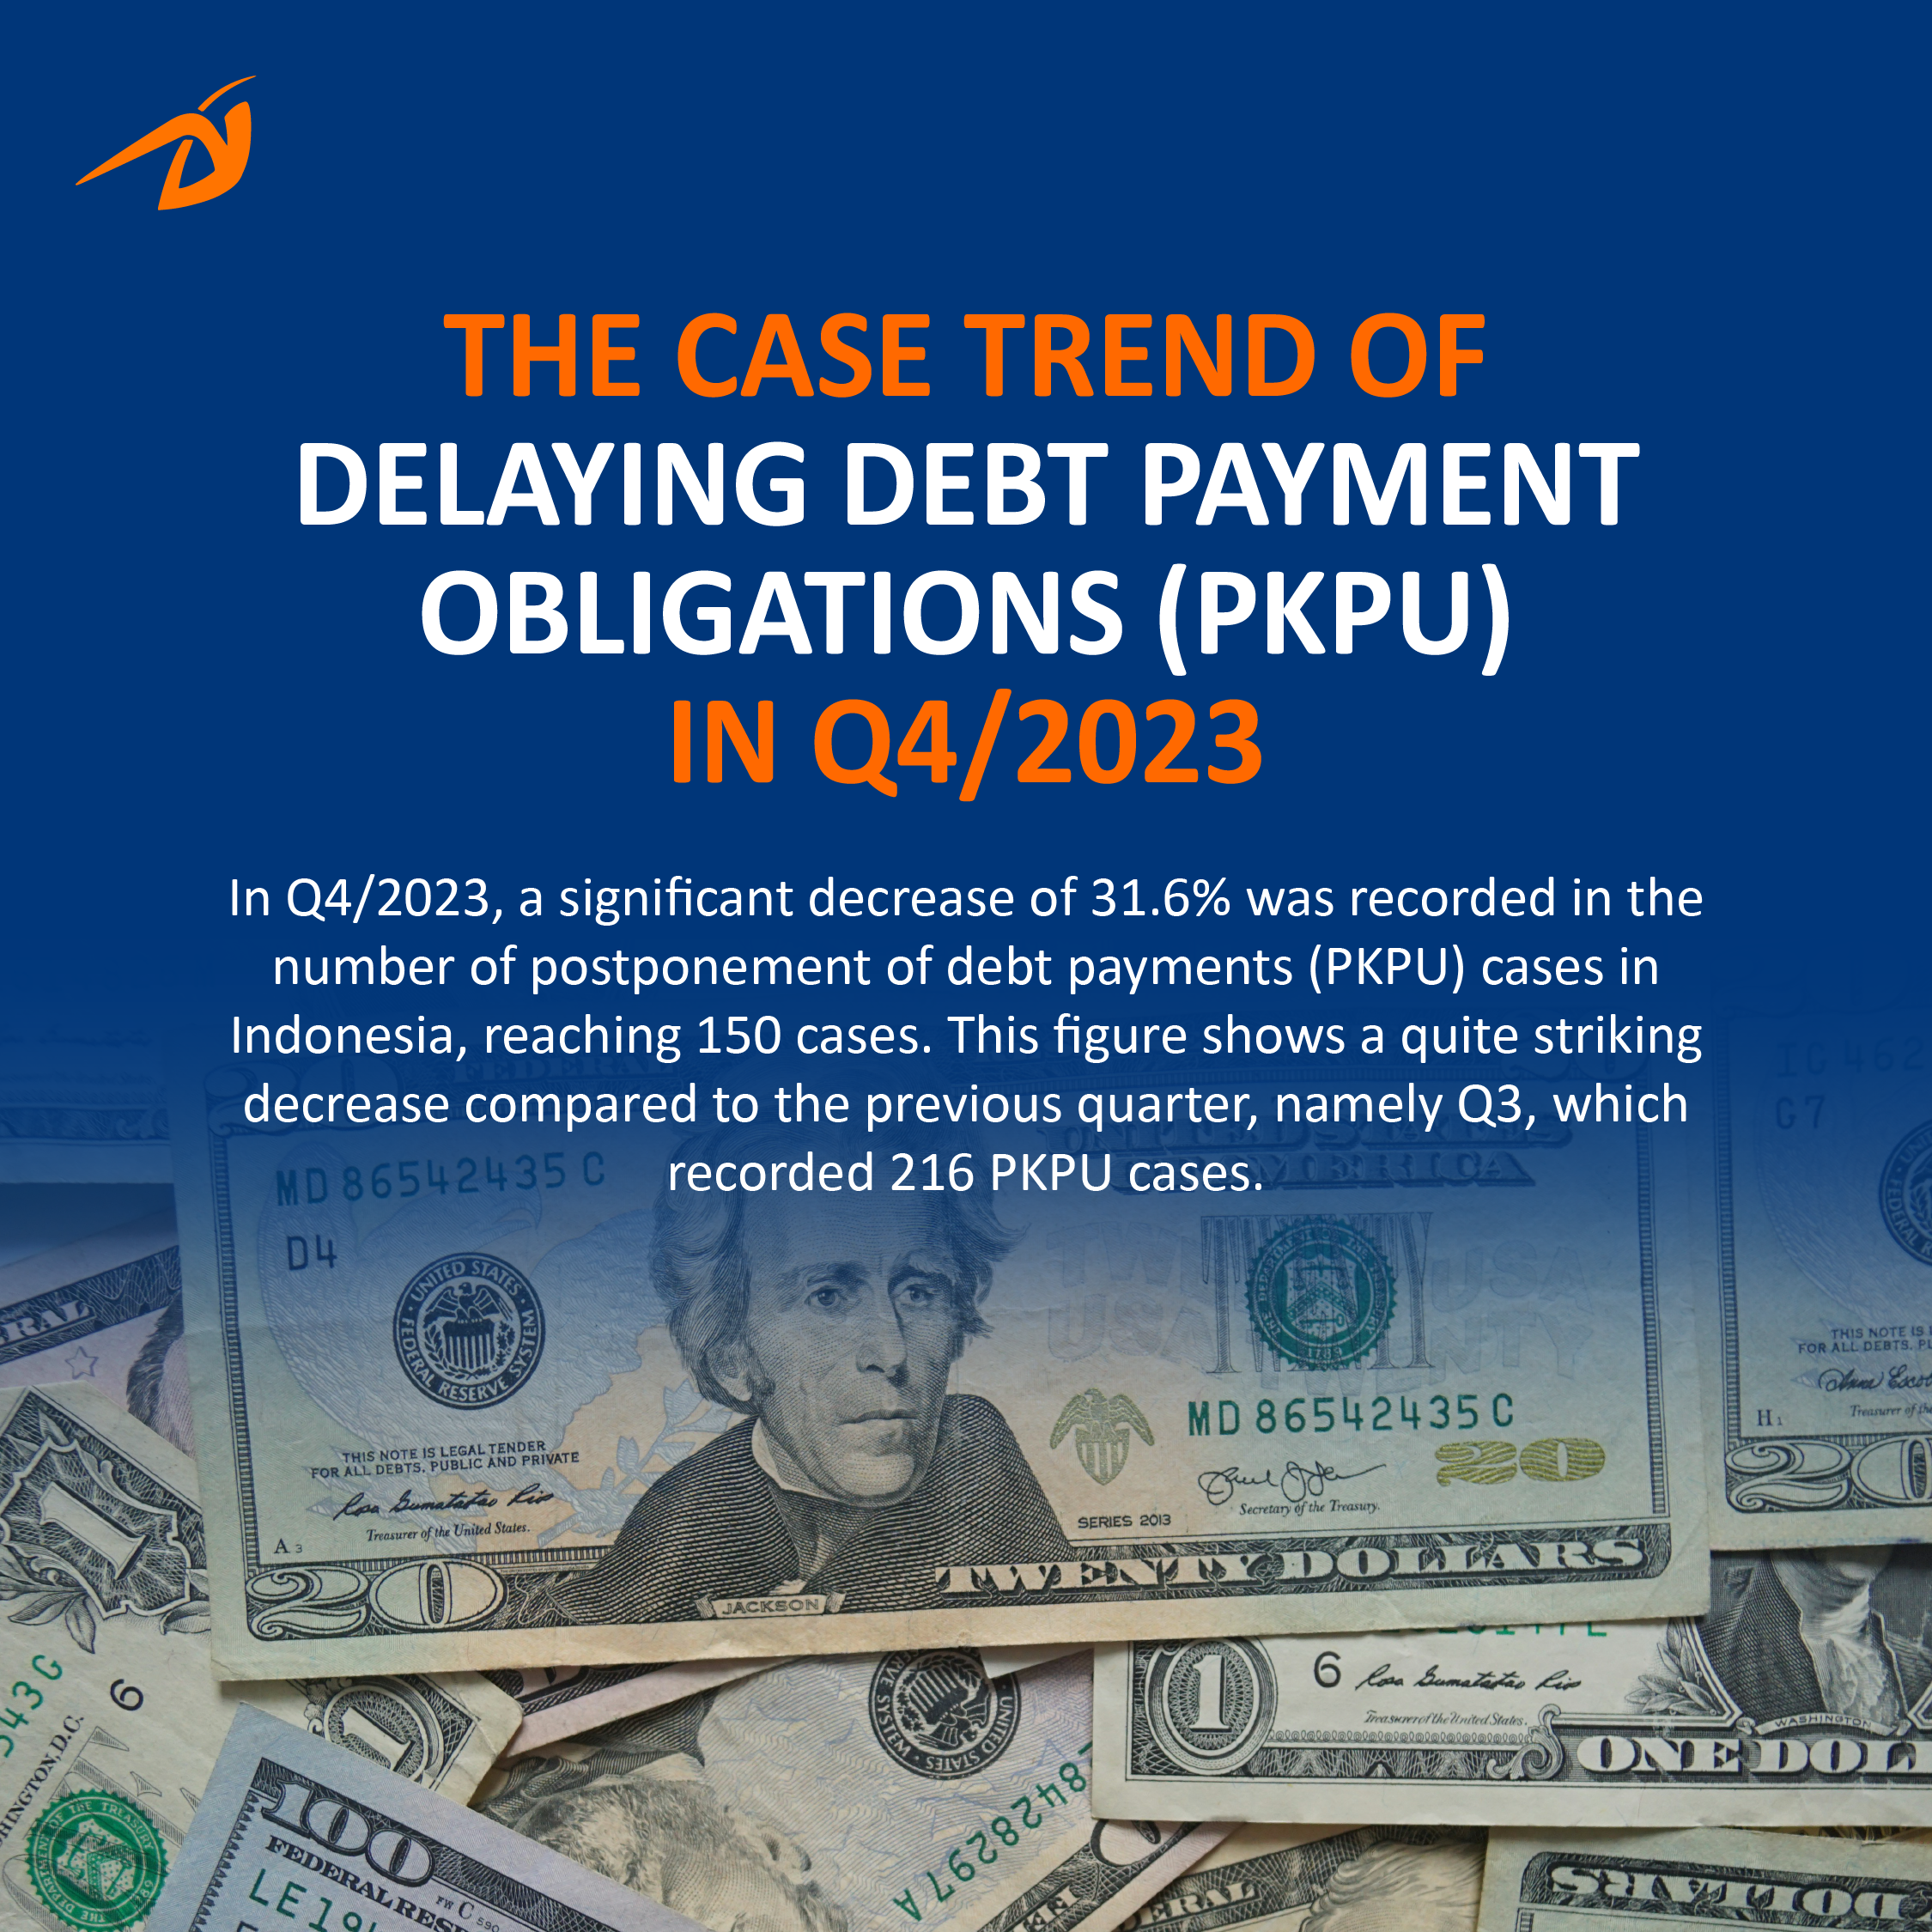 THE CASE TREND OF DELAYING DEBT PAYMENT OBLIGATIONS (PKPU) IN Q4/2023